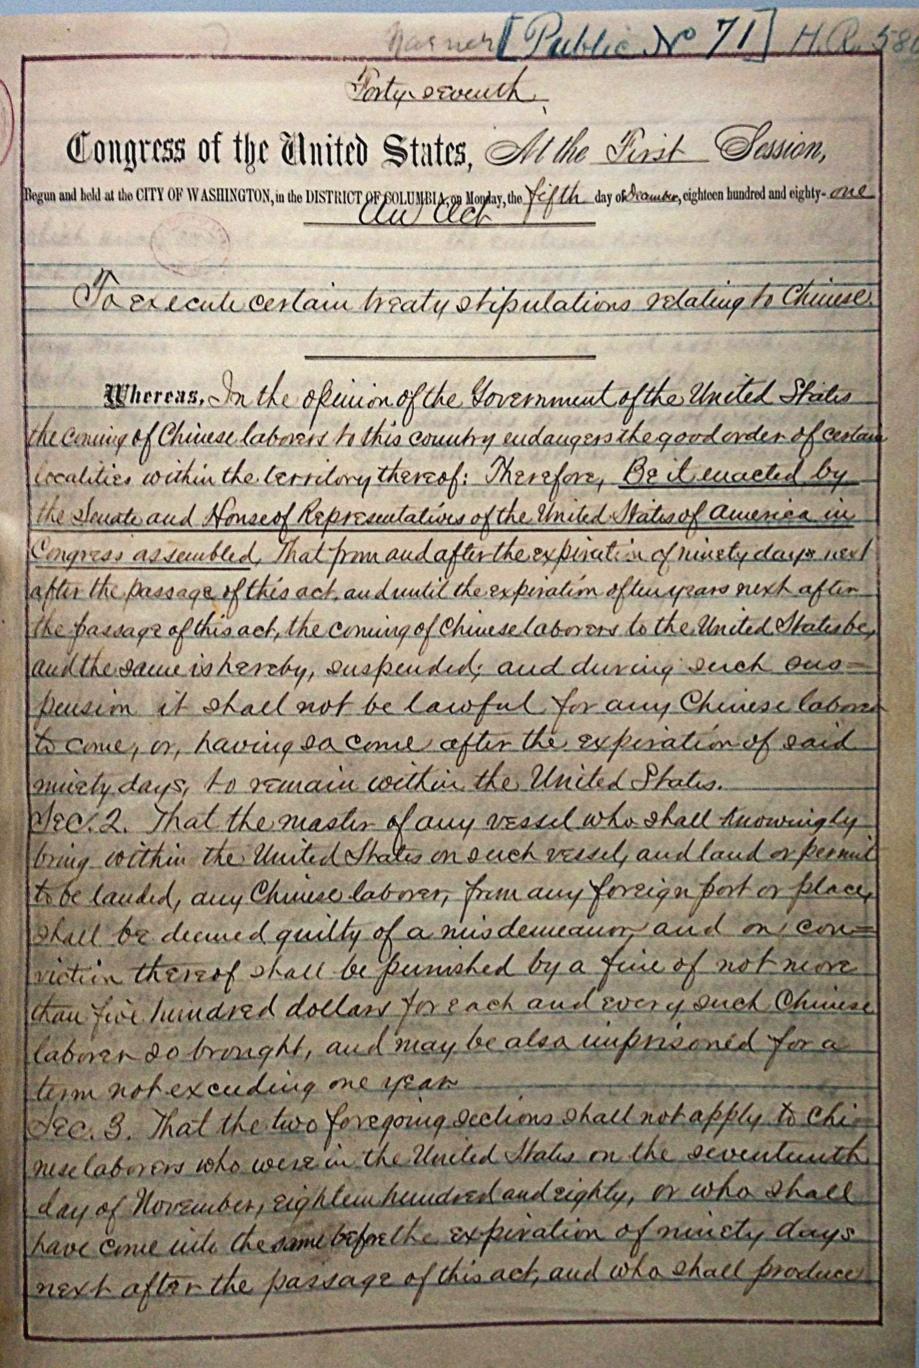 1882 Chinese Exclusion Act Prohibited Chinese from immigrating to the U.S.